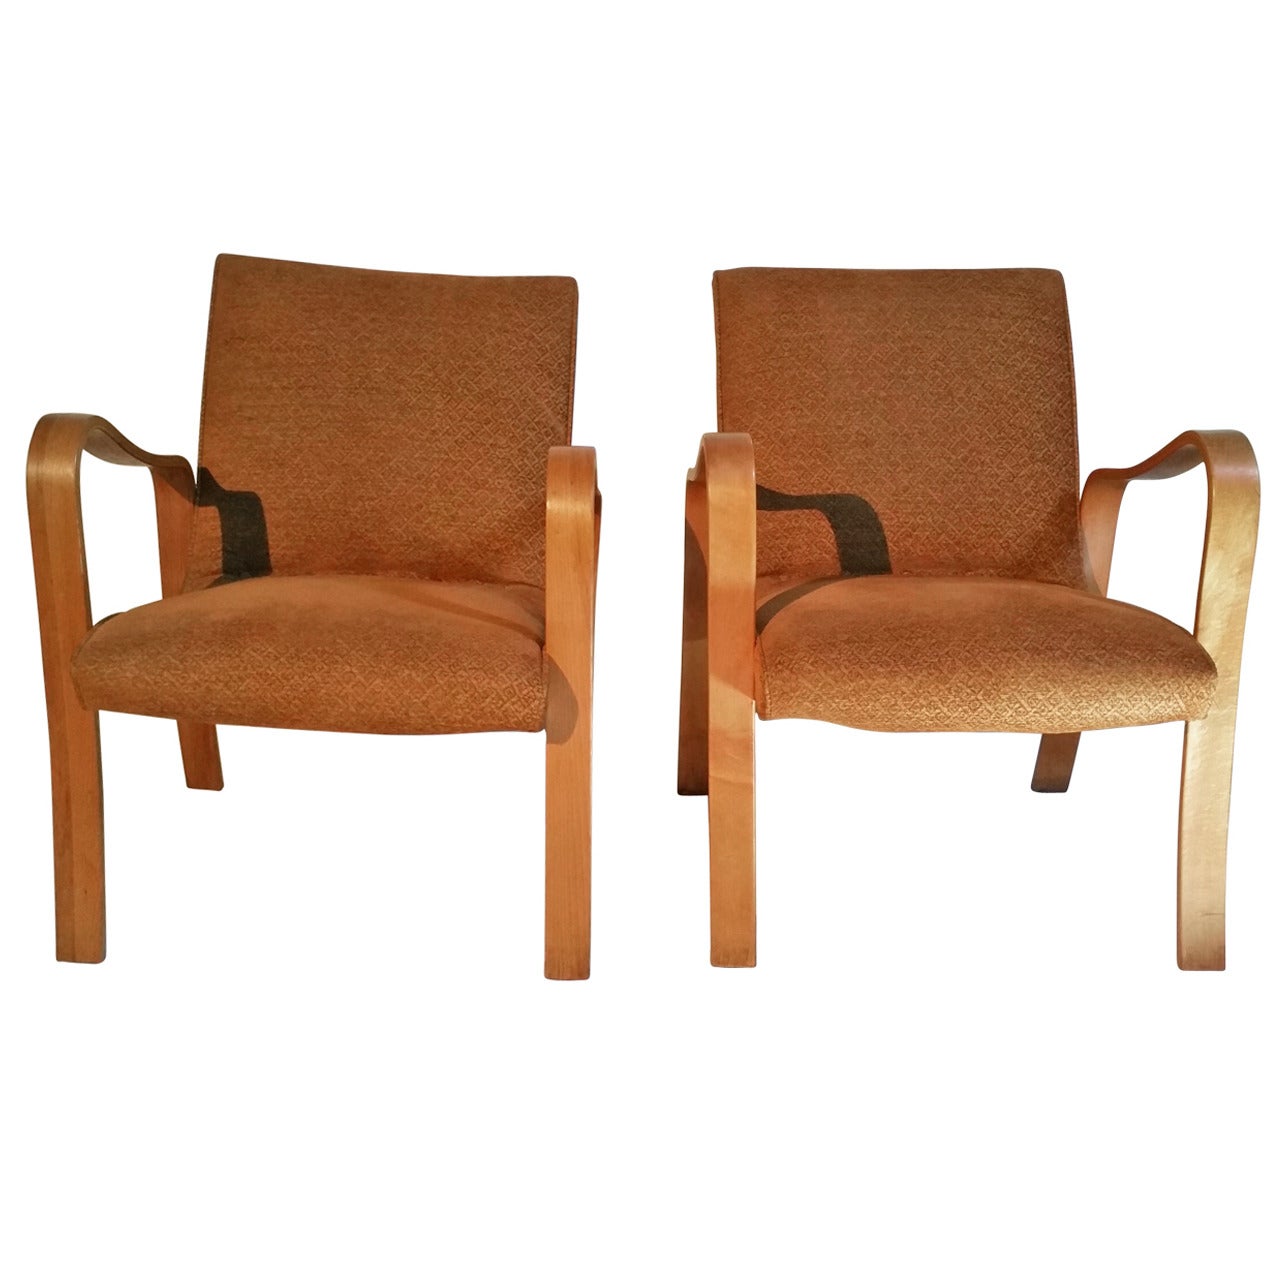 Pair of Classic Thonet Bentwood Modernist Lounge Chairs